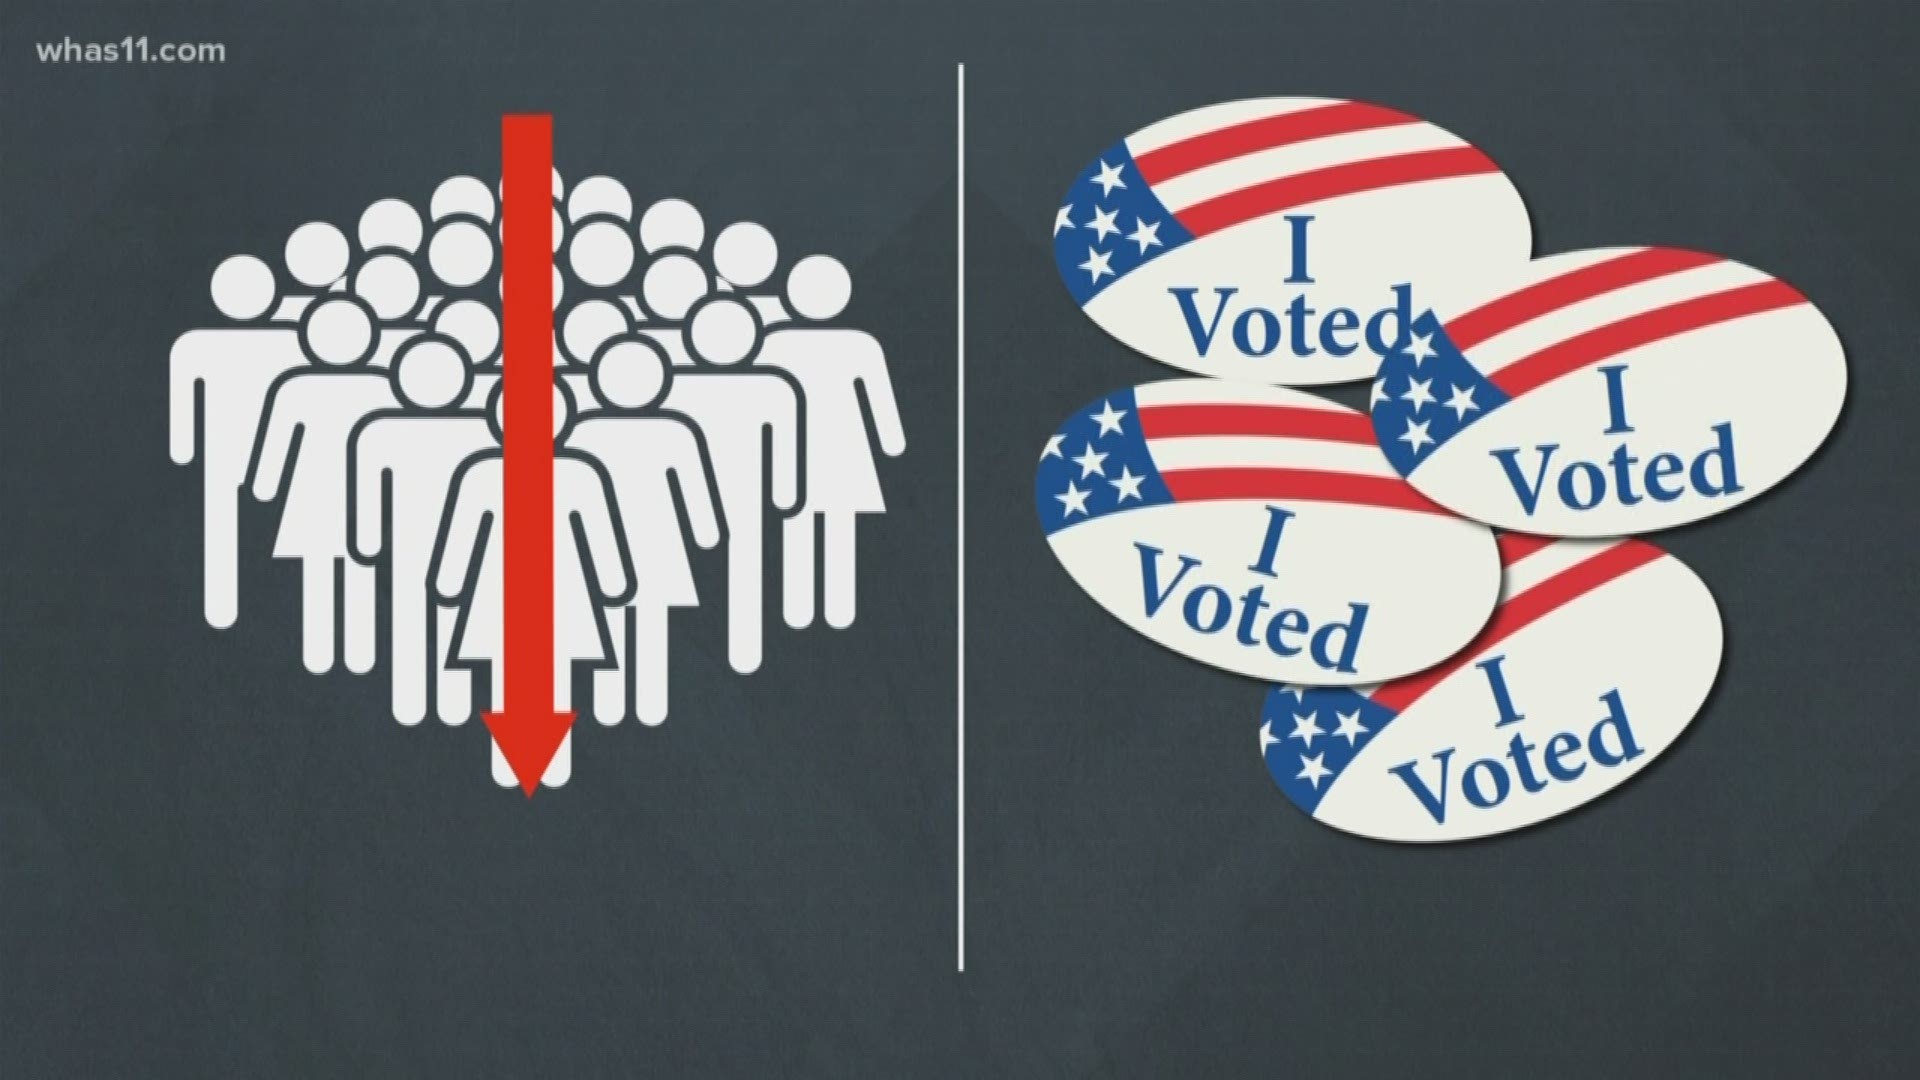 Voter suppression: any effort, legal or illegal, by way of laws, administrative rules, and/or tactics that prevent eligible voters from registering to vote or voting